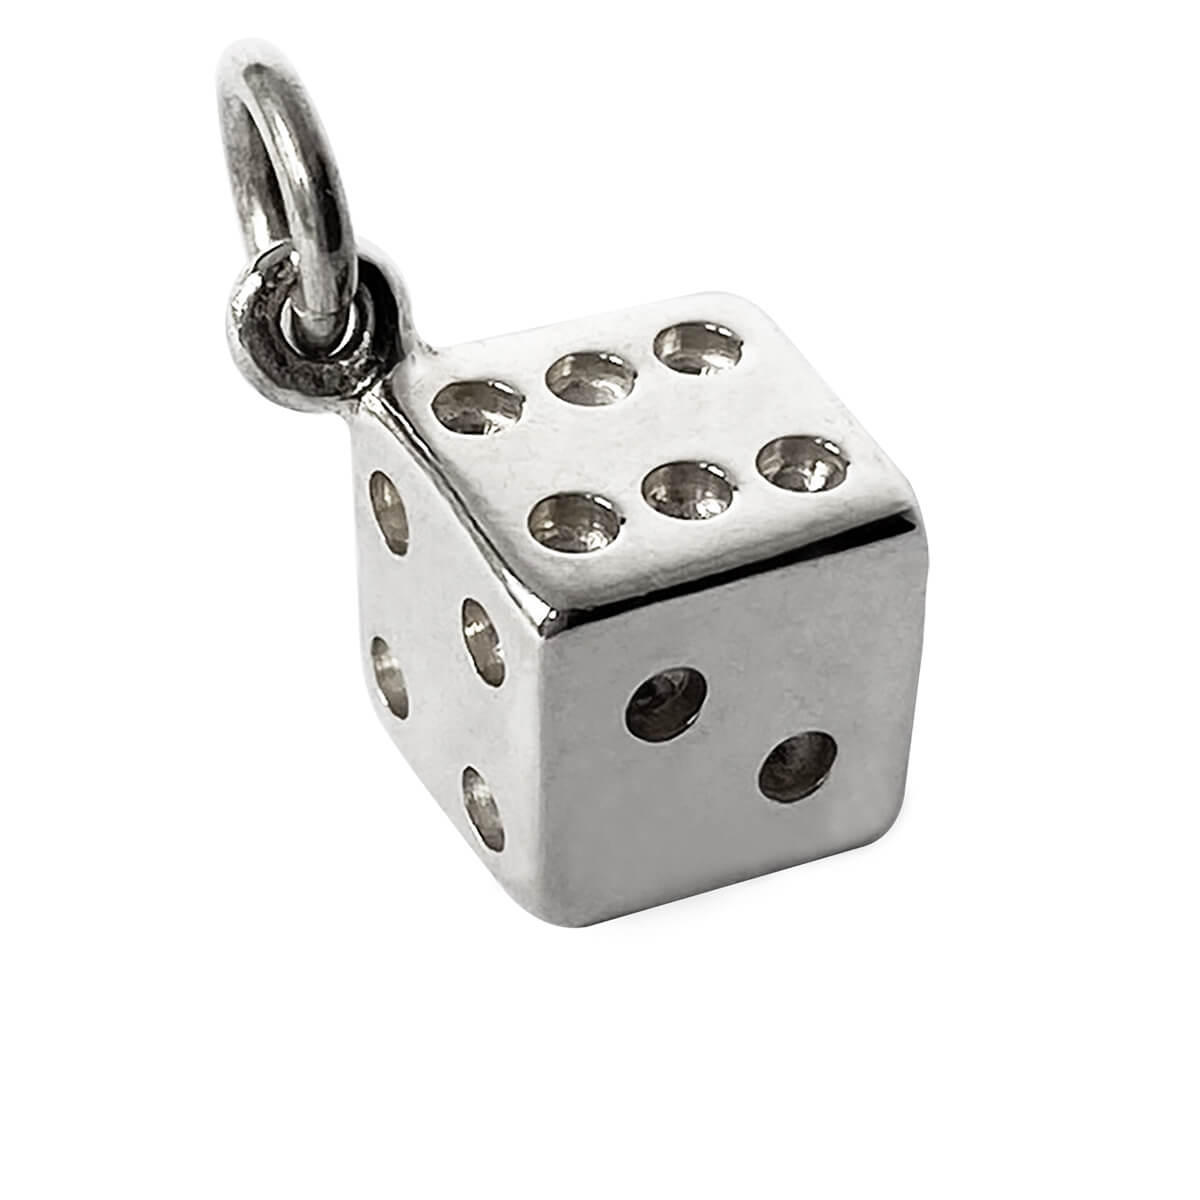 Single dice charm sterling silver pendant